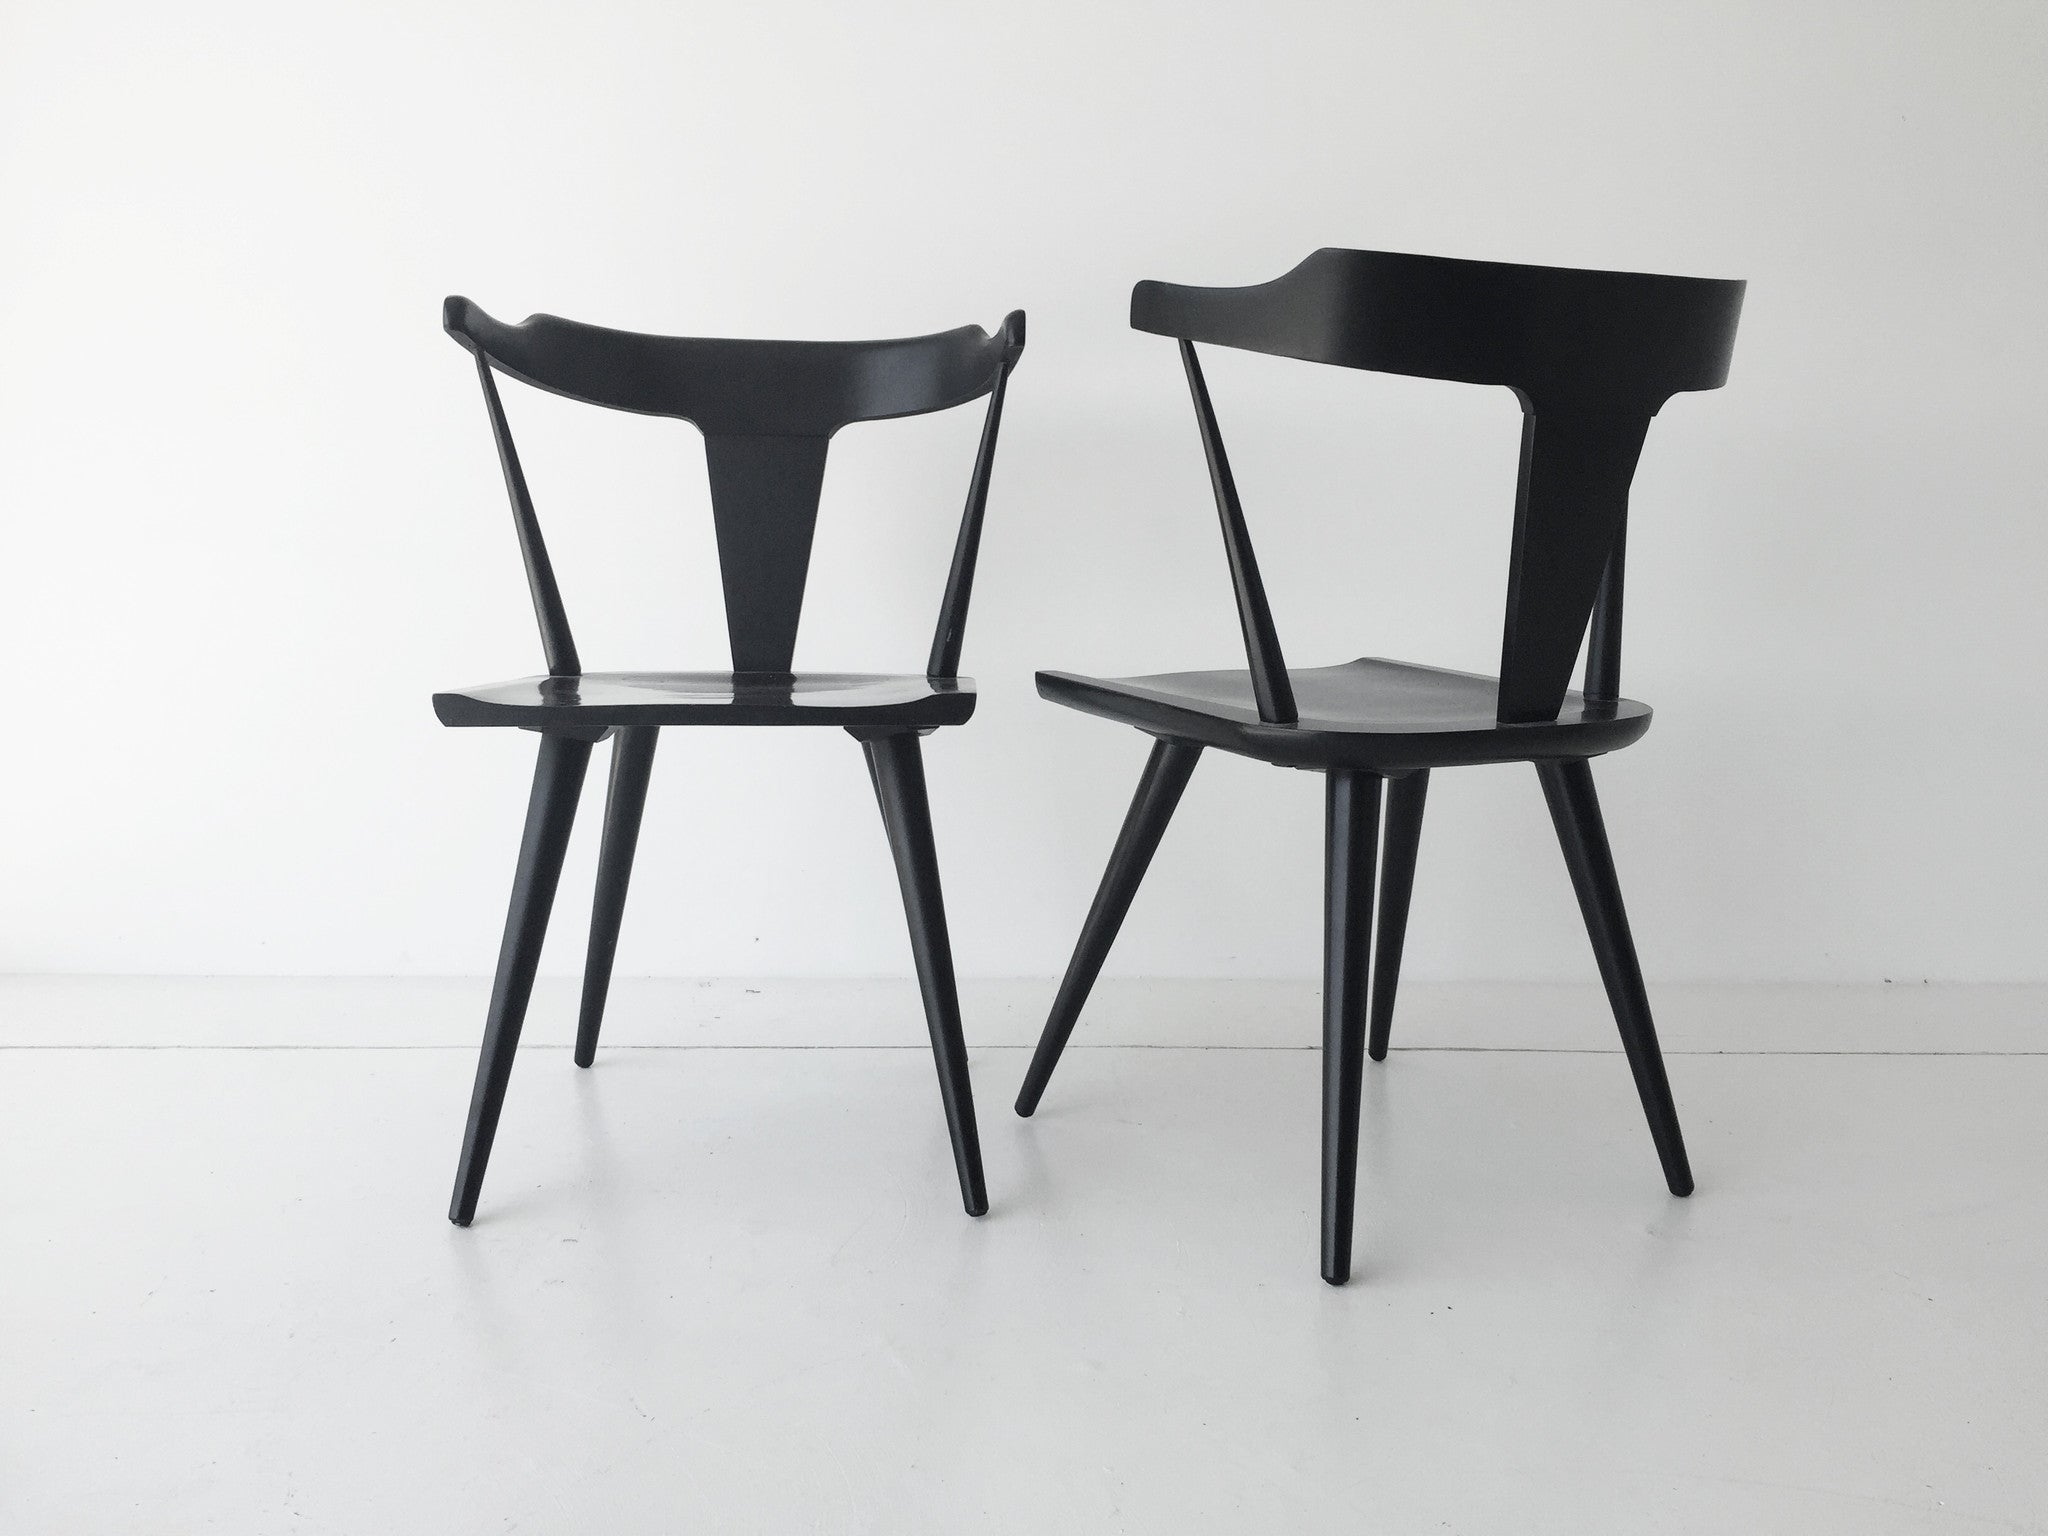 Paul McCobb Dining Chairs for Winchendon, Planner Group Series - 05271603